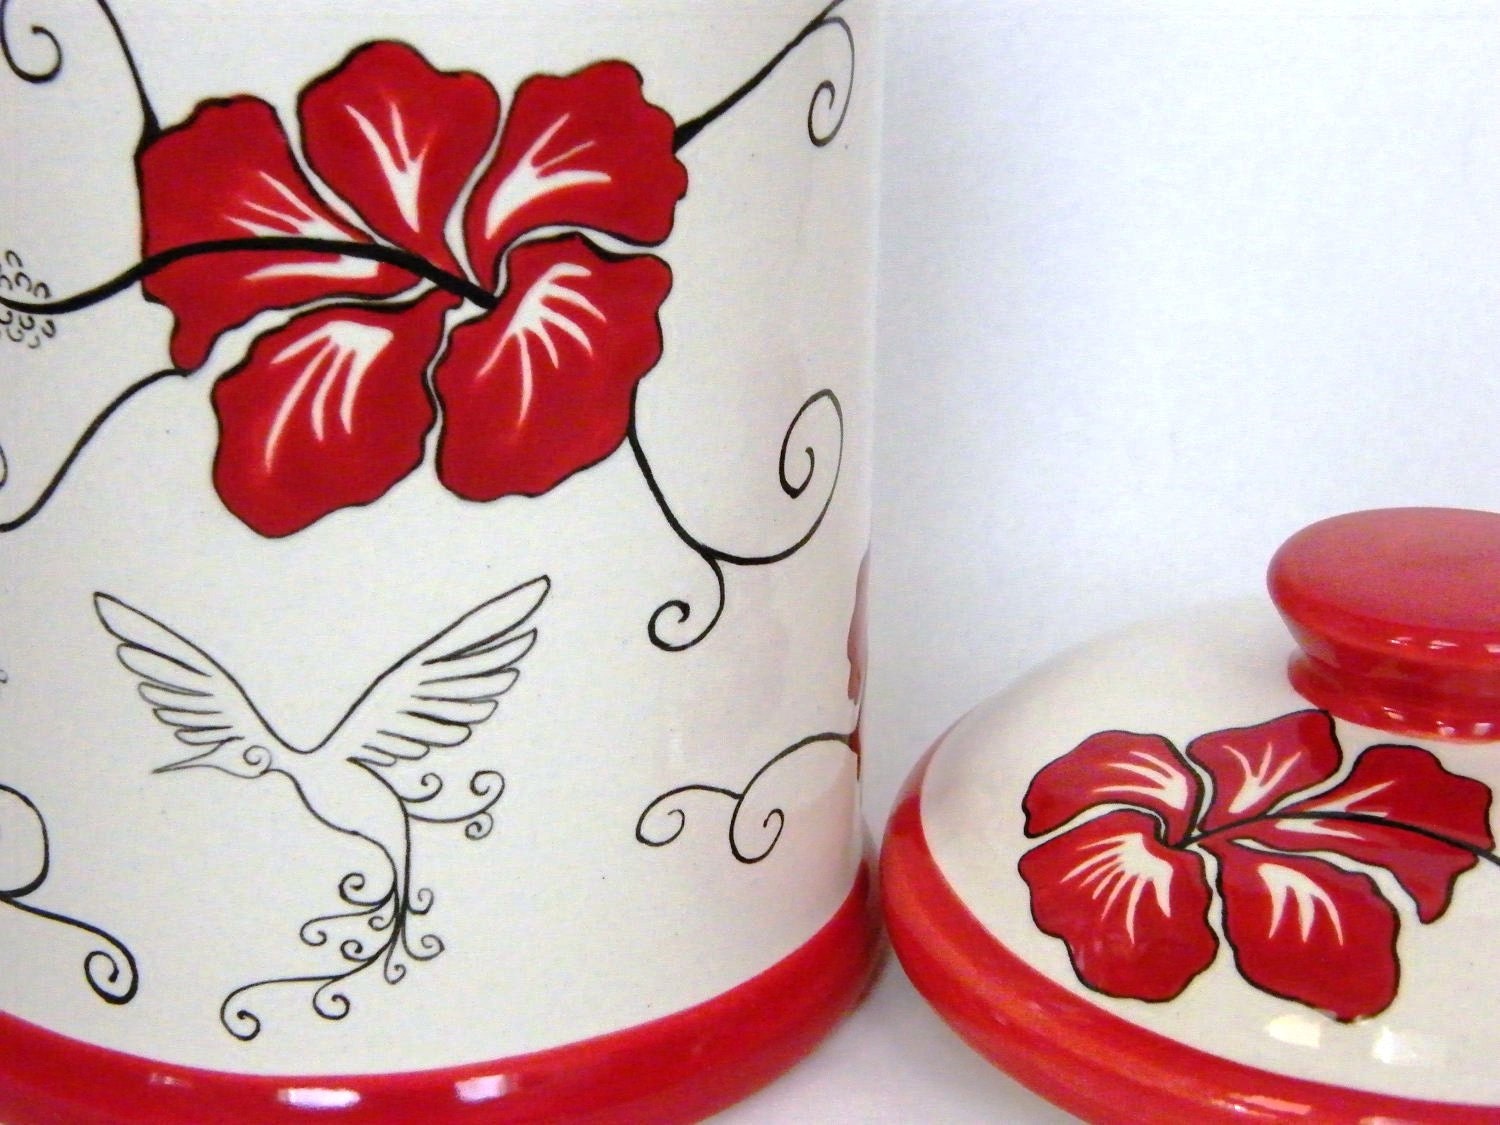 Canister with Hibiscus design in Red and Black - BonCreationz